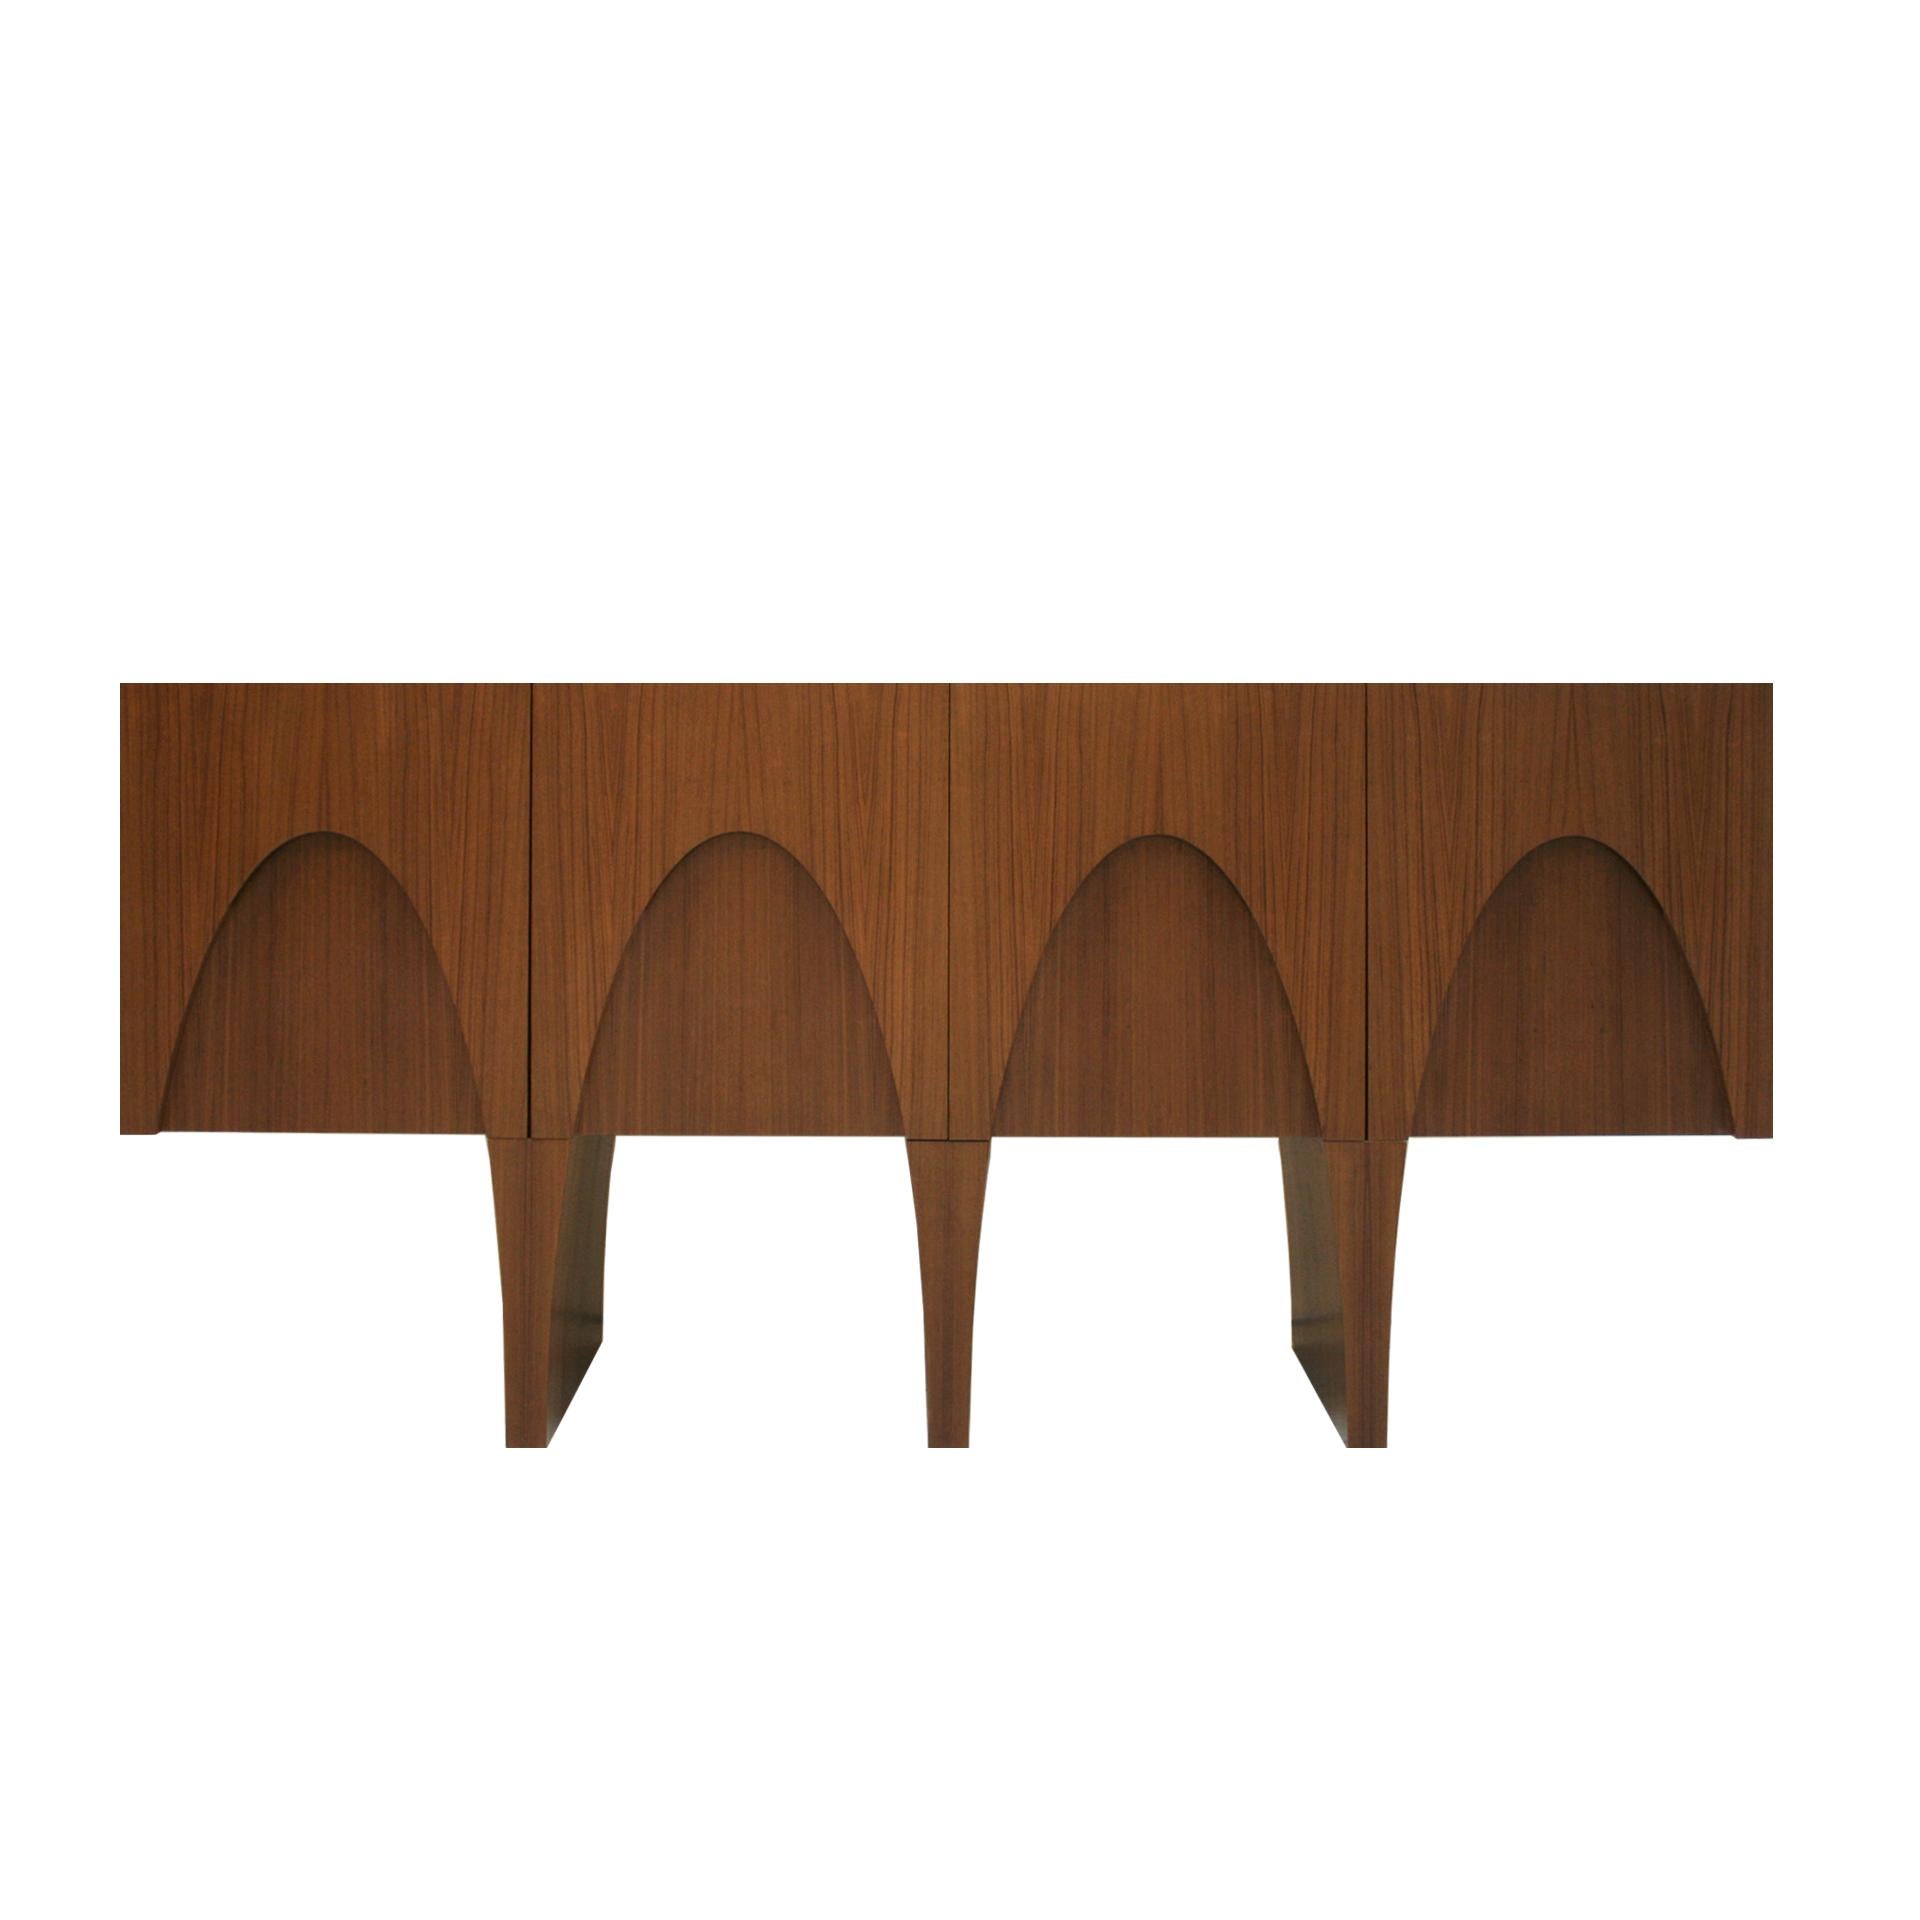 Contemporary Modern Teak and Lemongrass Wood Sideboard In Good Condition For Sale In Ibiza, Spain